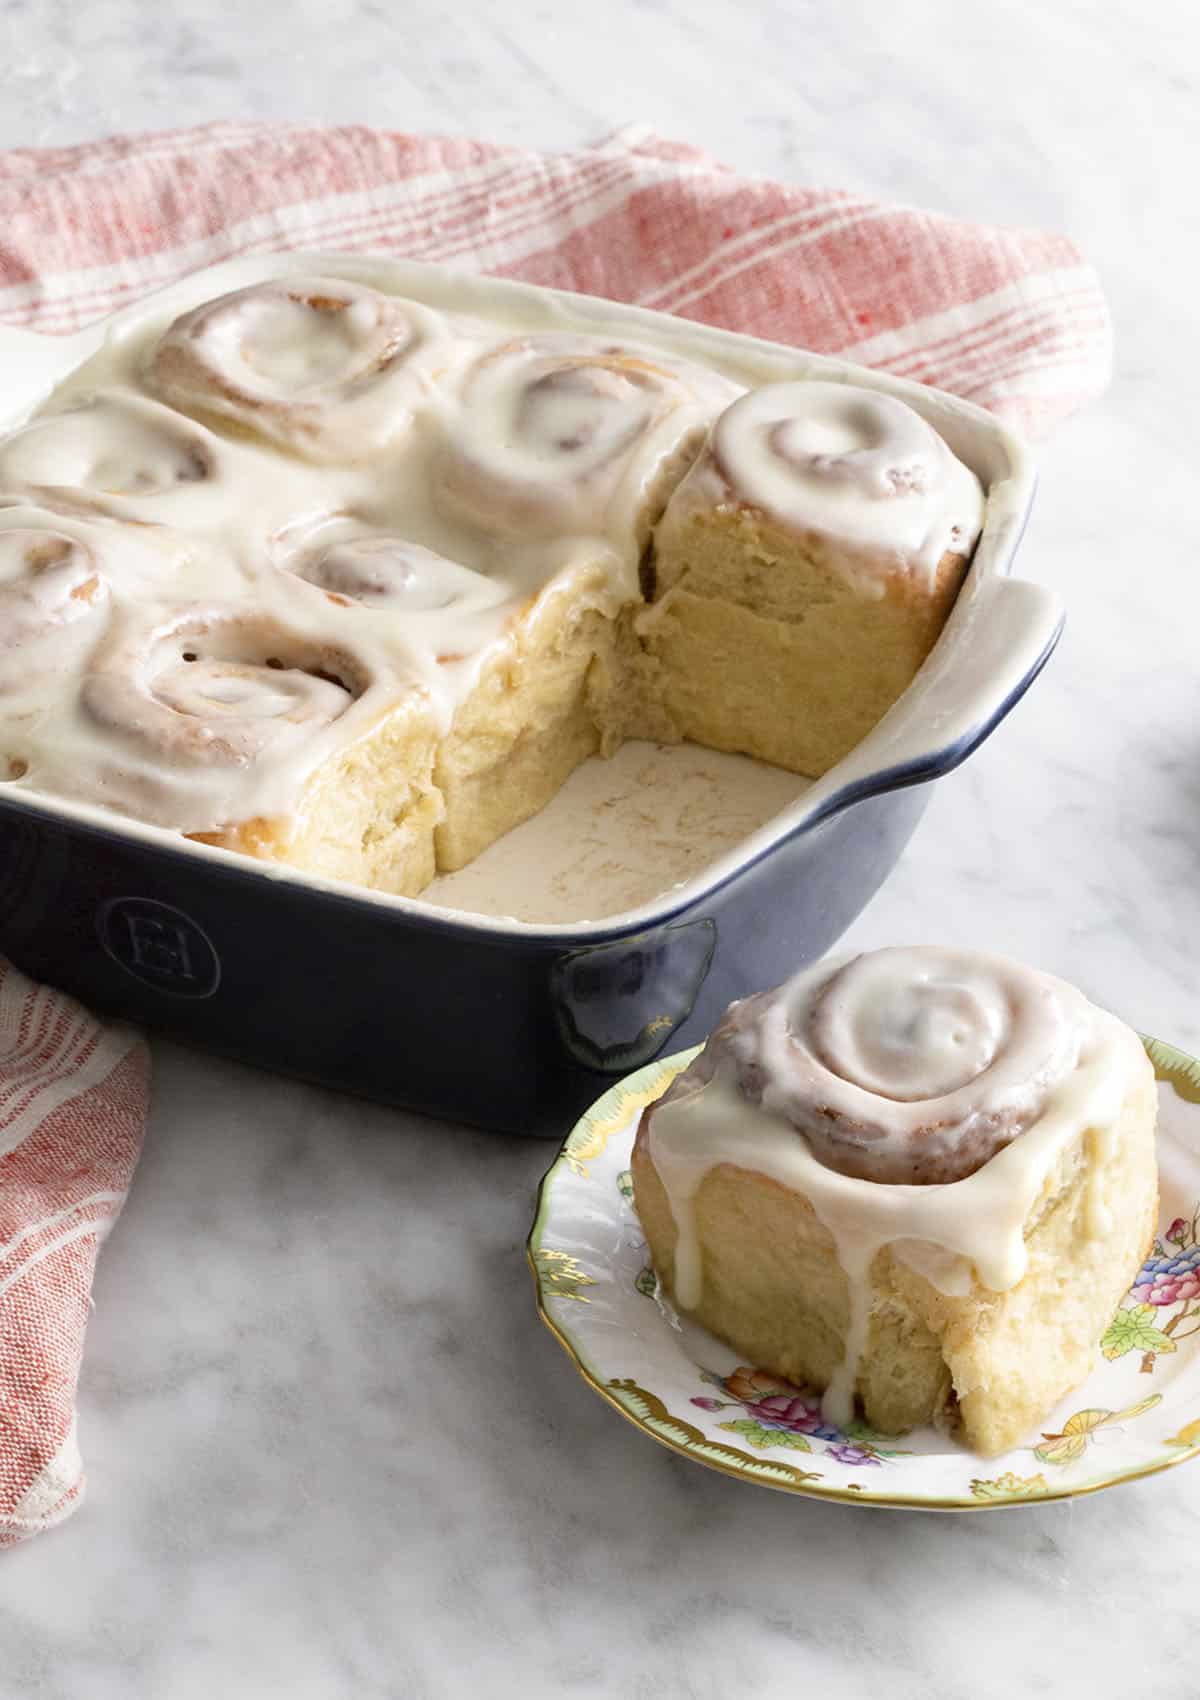 Freshly baked cinnamon rolls on a marble counter.